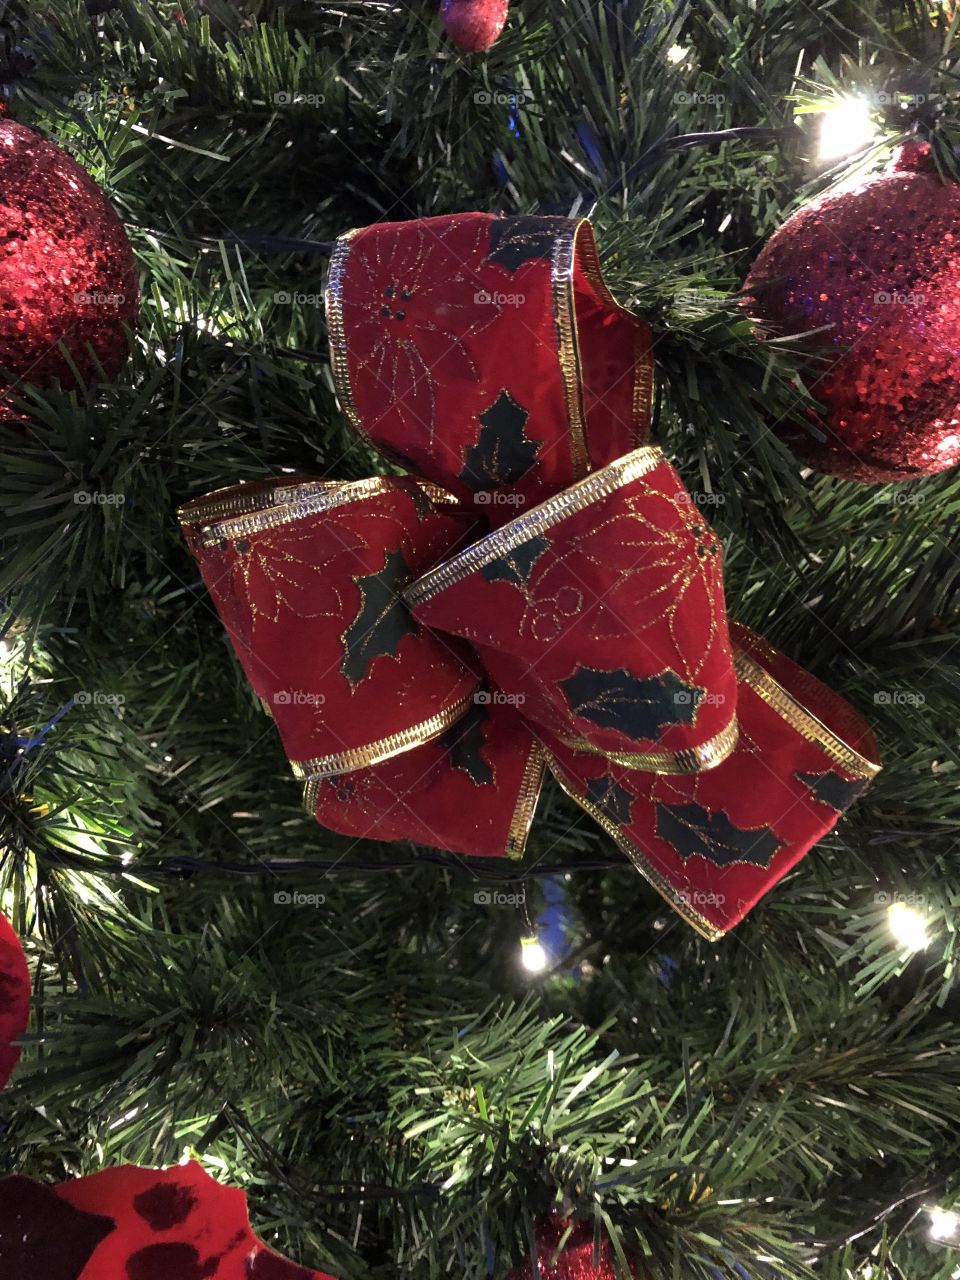 Christmas tree with a red tie decoration